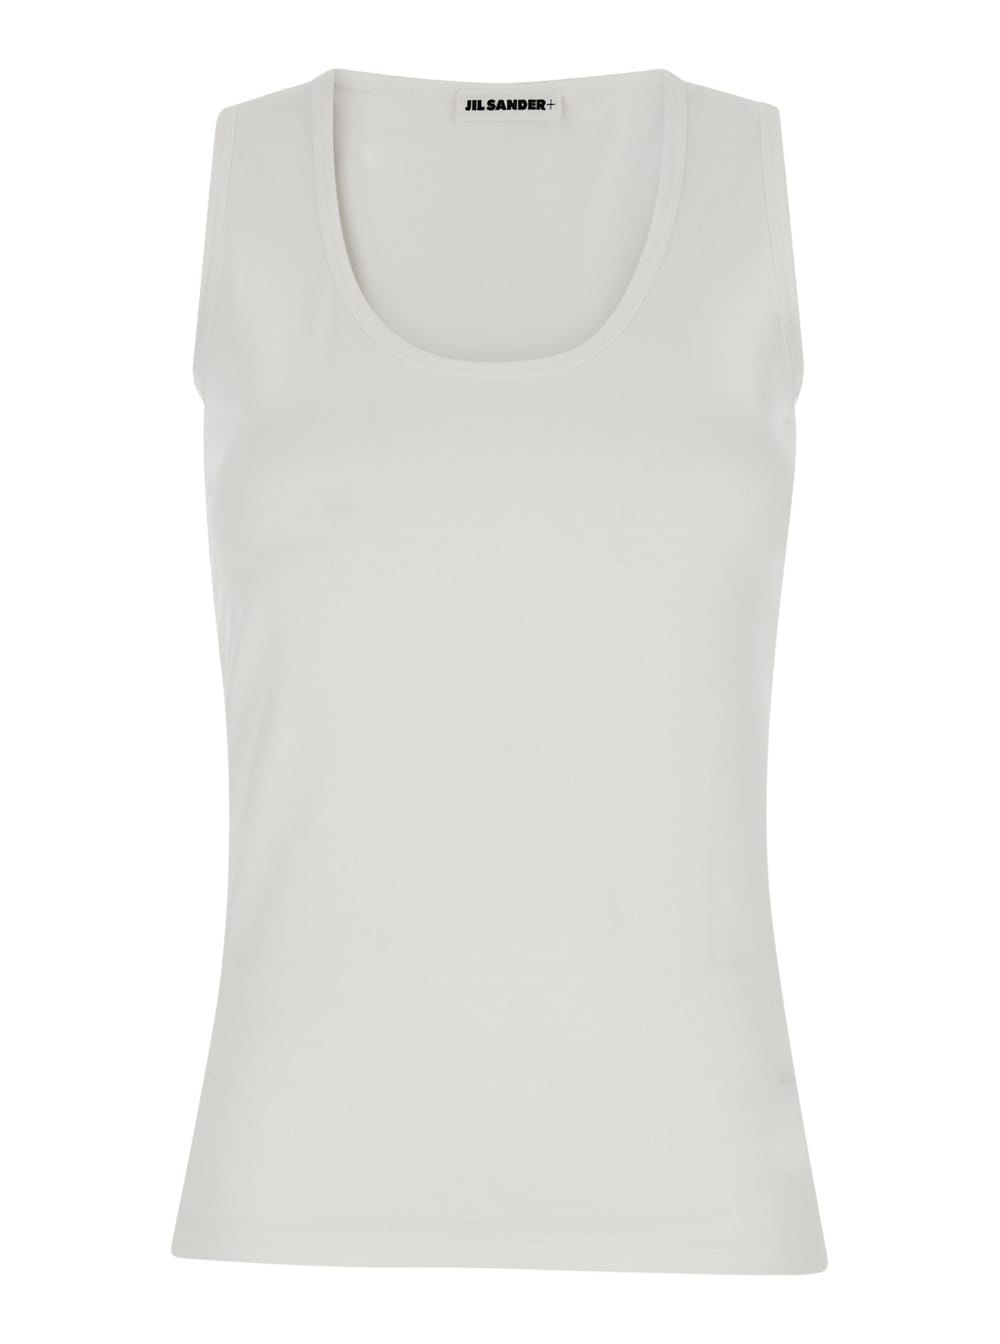 JIL SANDER WHITE BASIC TANK TOP WITH EMBROIDERED LOGO IN COTTON WOMAN